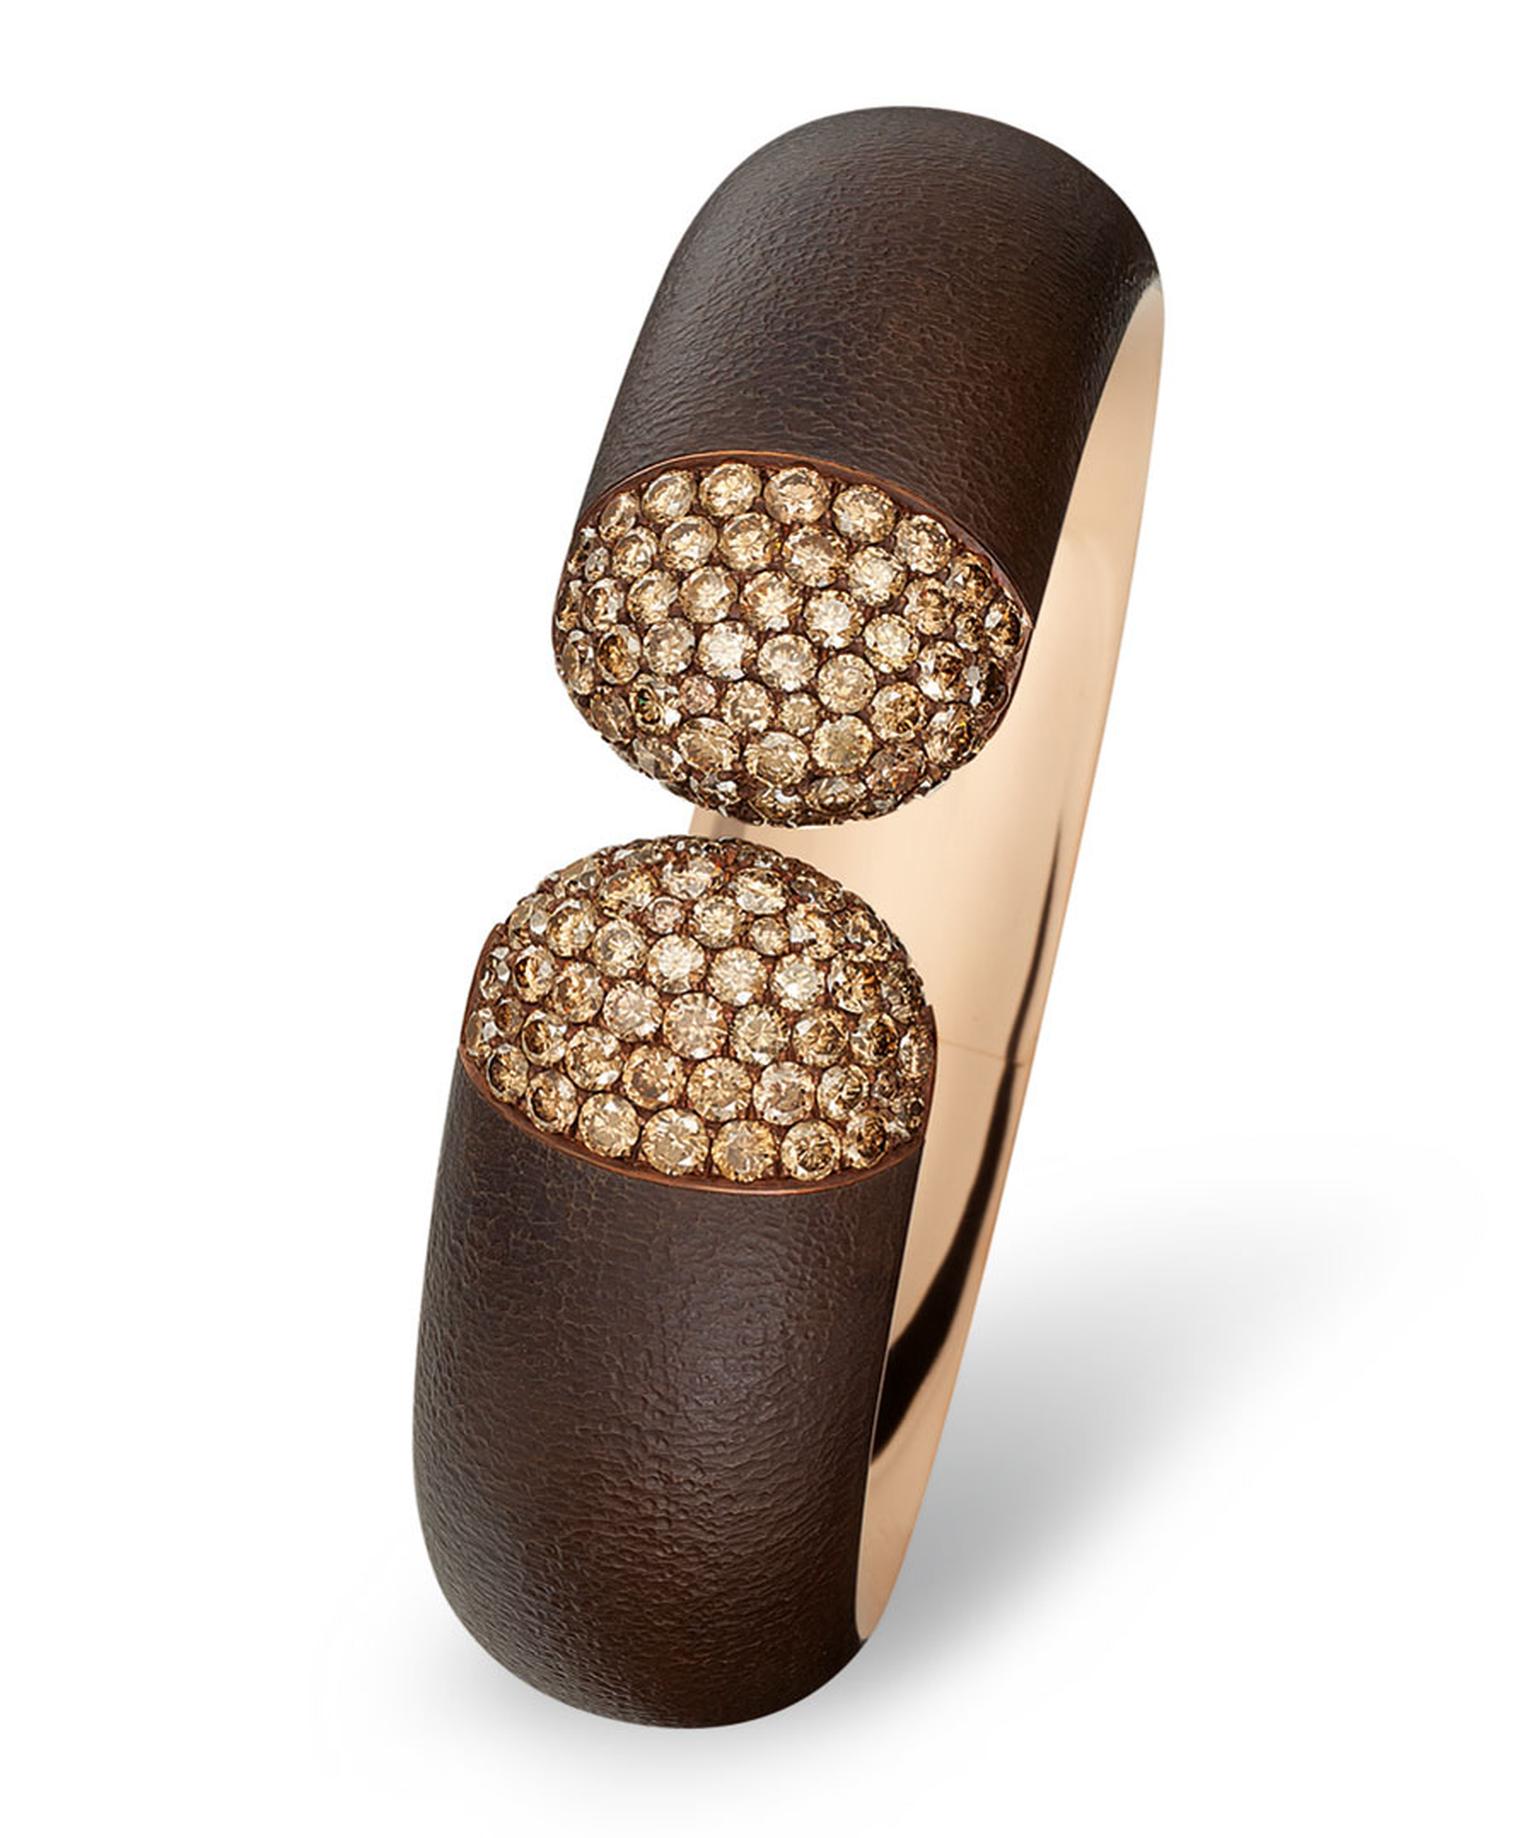 Hemmerle-Bangle-copper-red-gold-brown-diamonds--1096_11